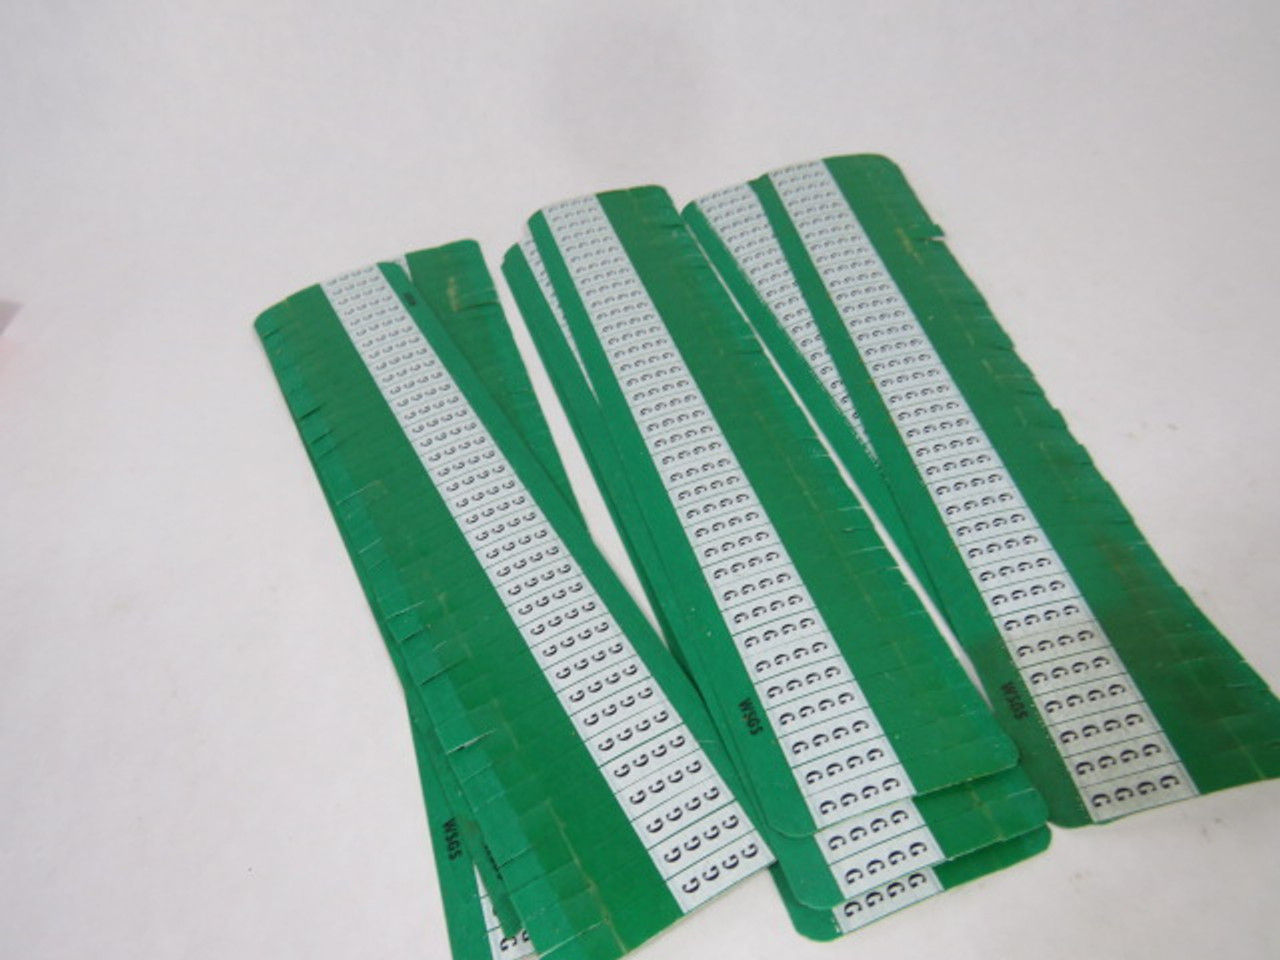 Thomas & Betts G Green E-Z-Code Wire Markers Lot of 7 ! NEW !